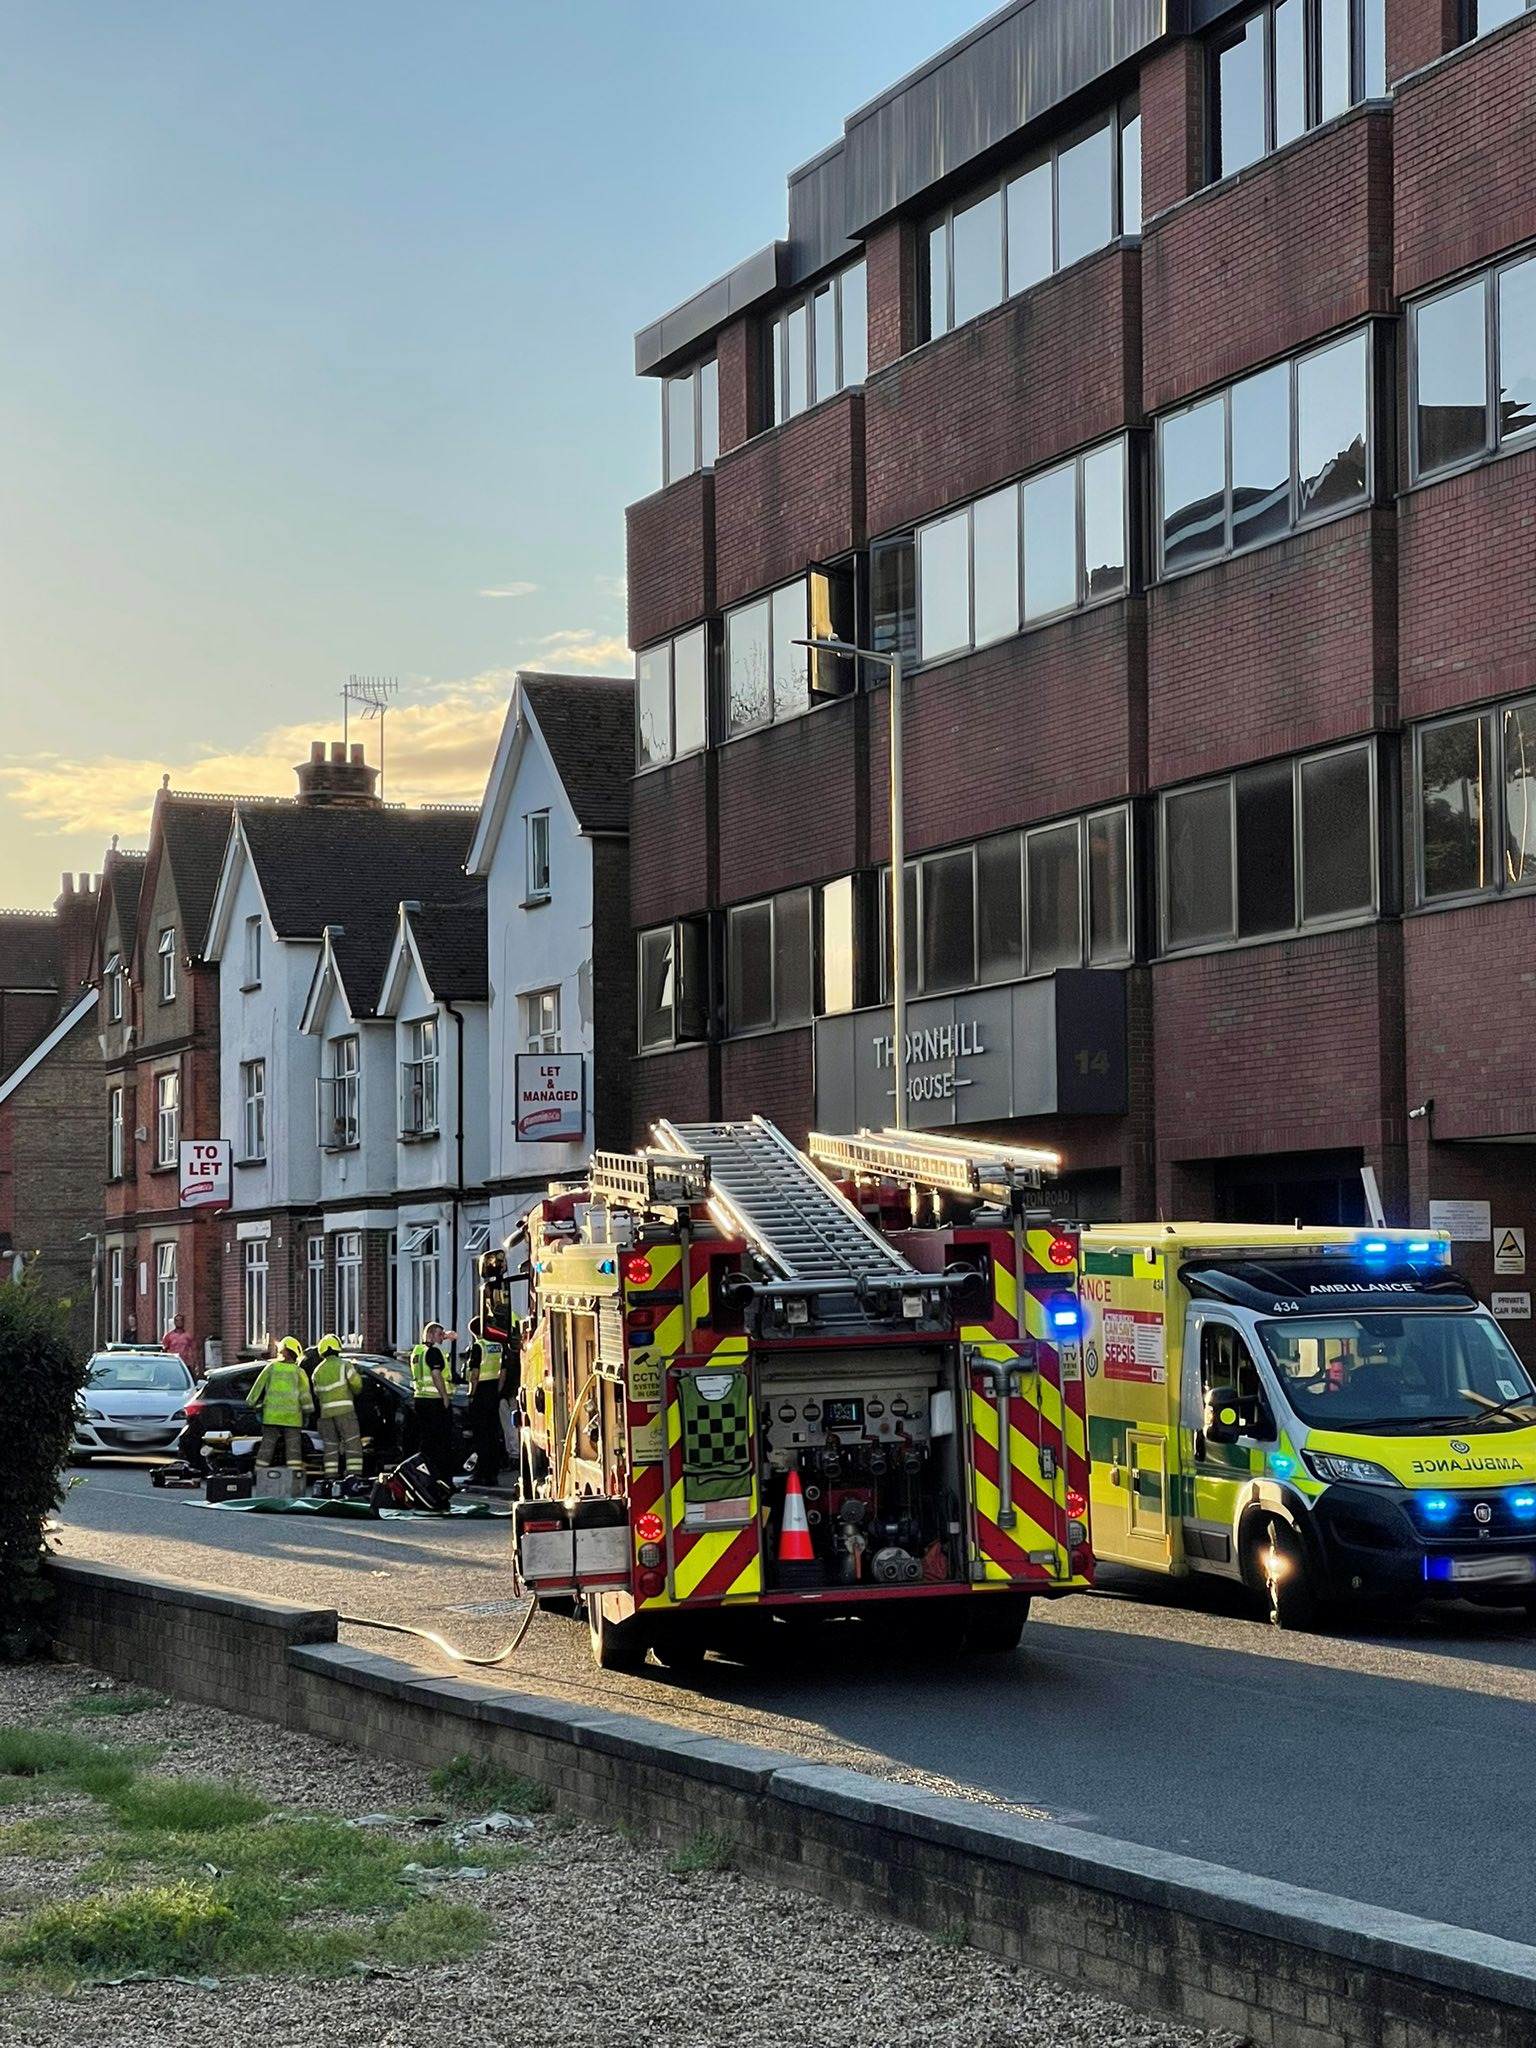 Emergency services were at the scene for an hour (Photo: @RabinovitchAdam)